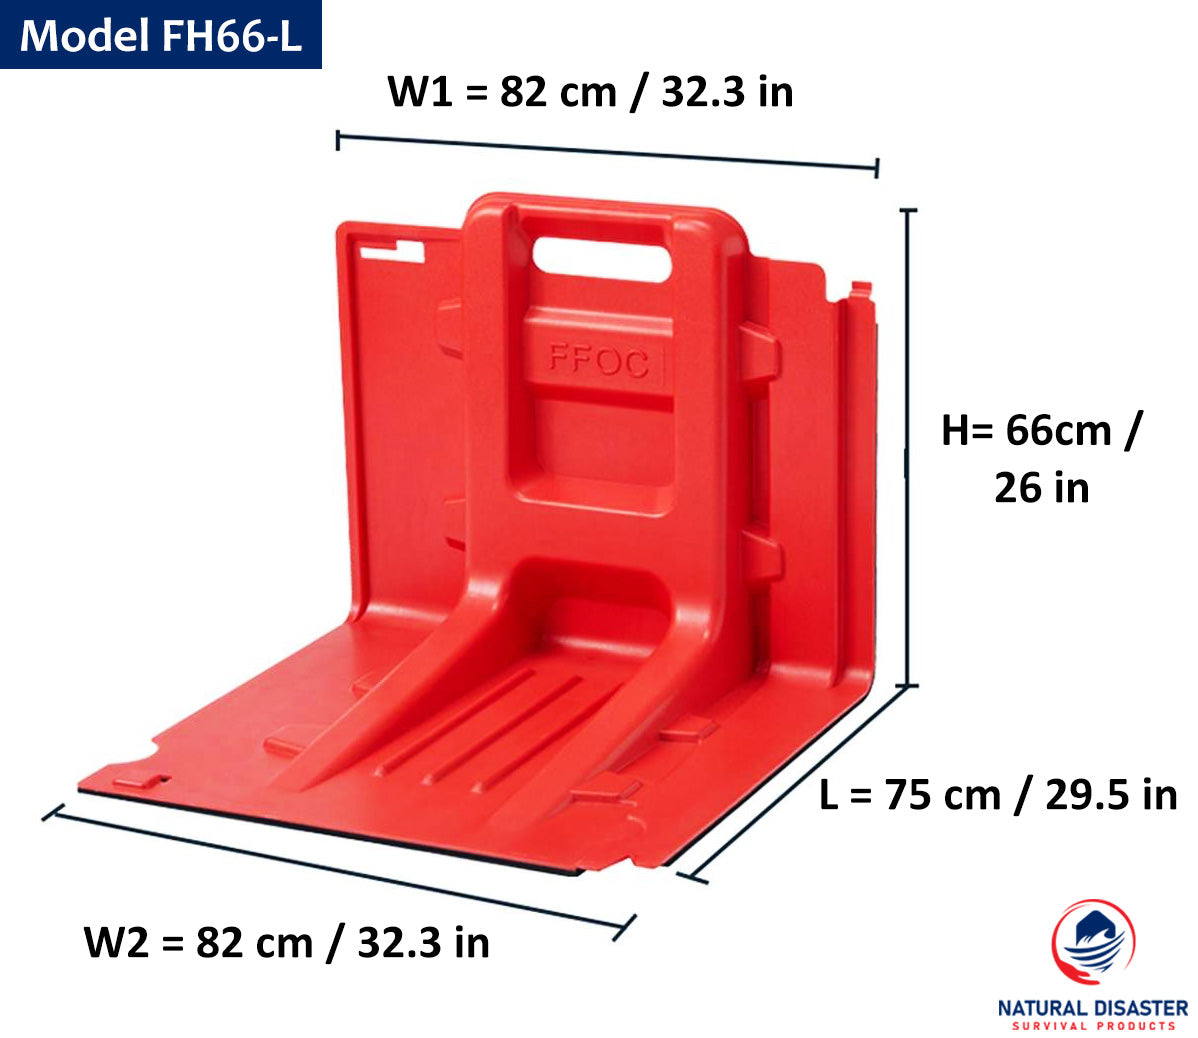 Flood Barriers Model FH66-L